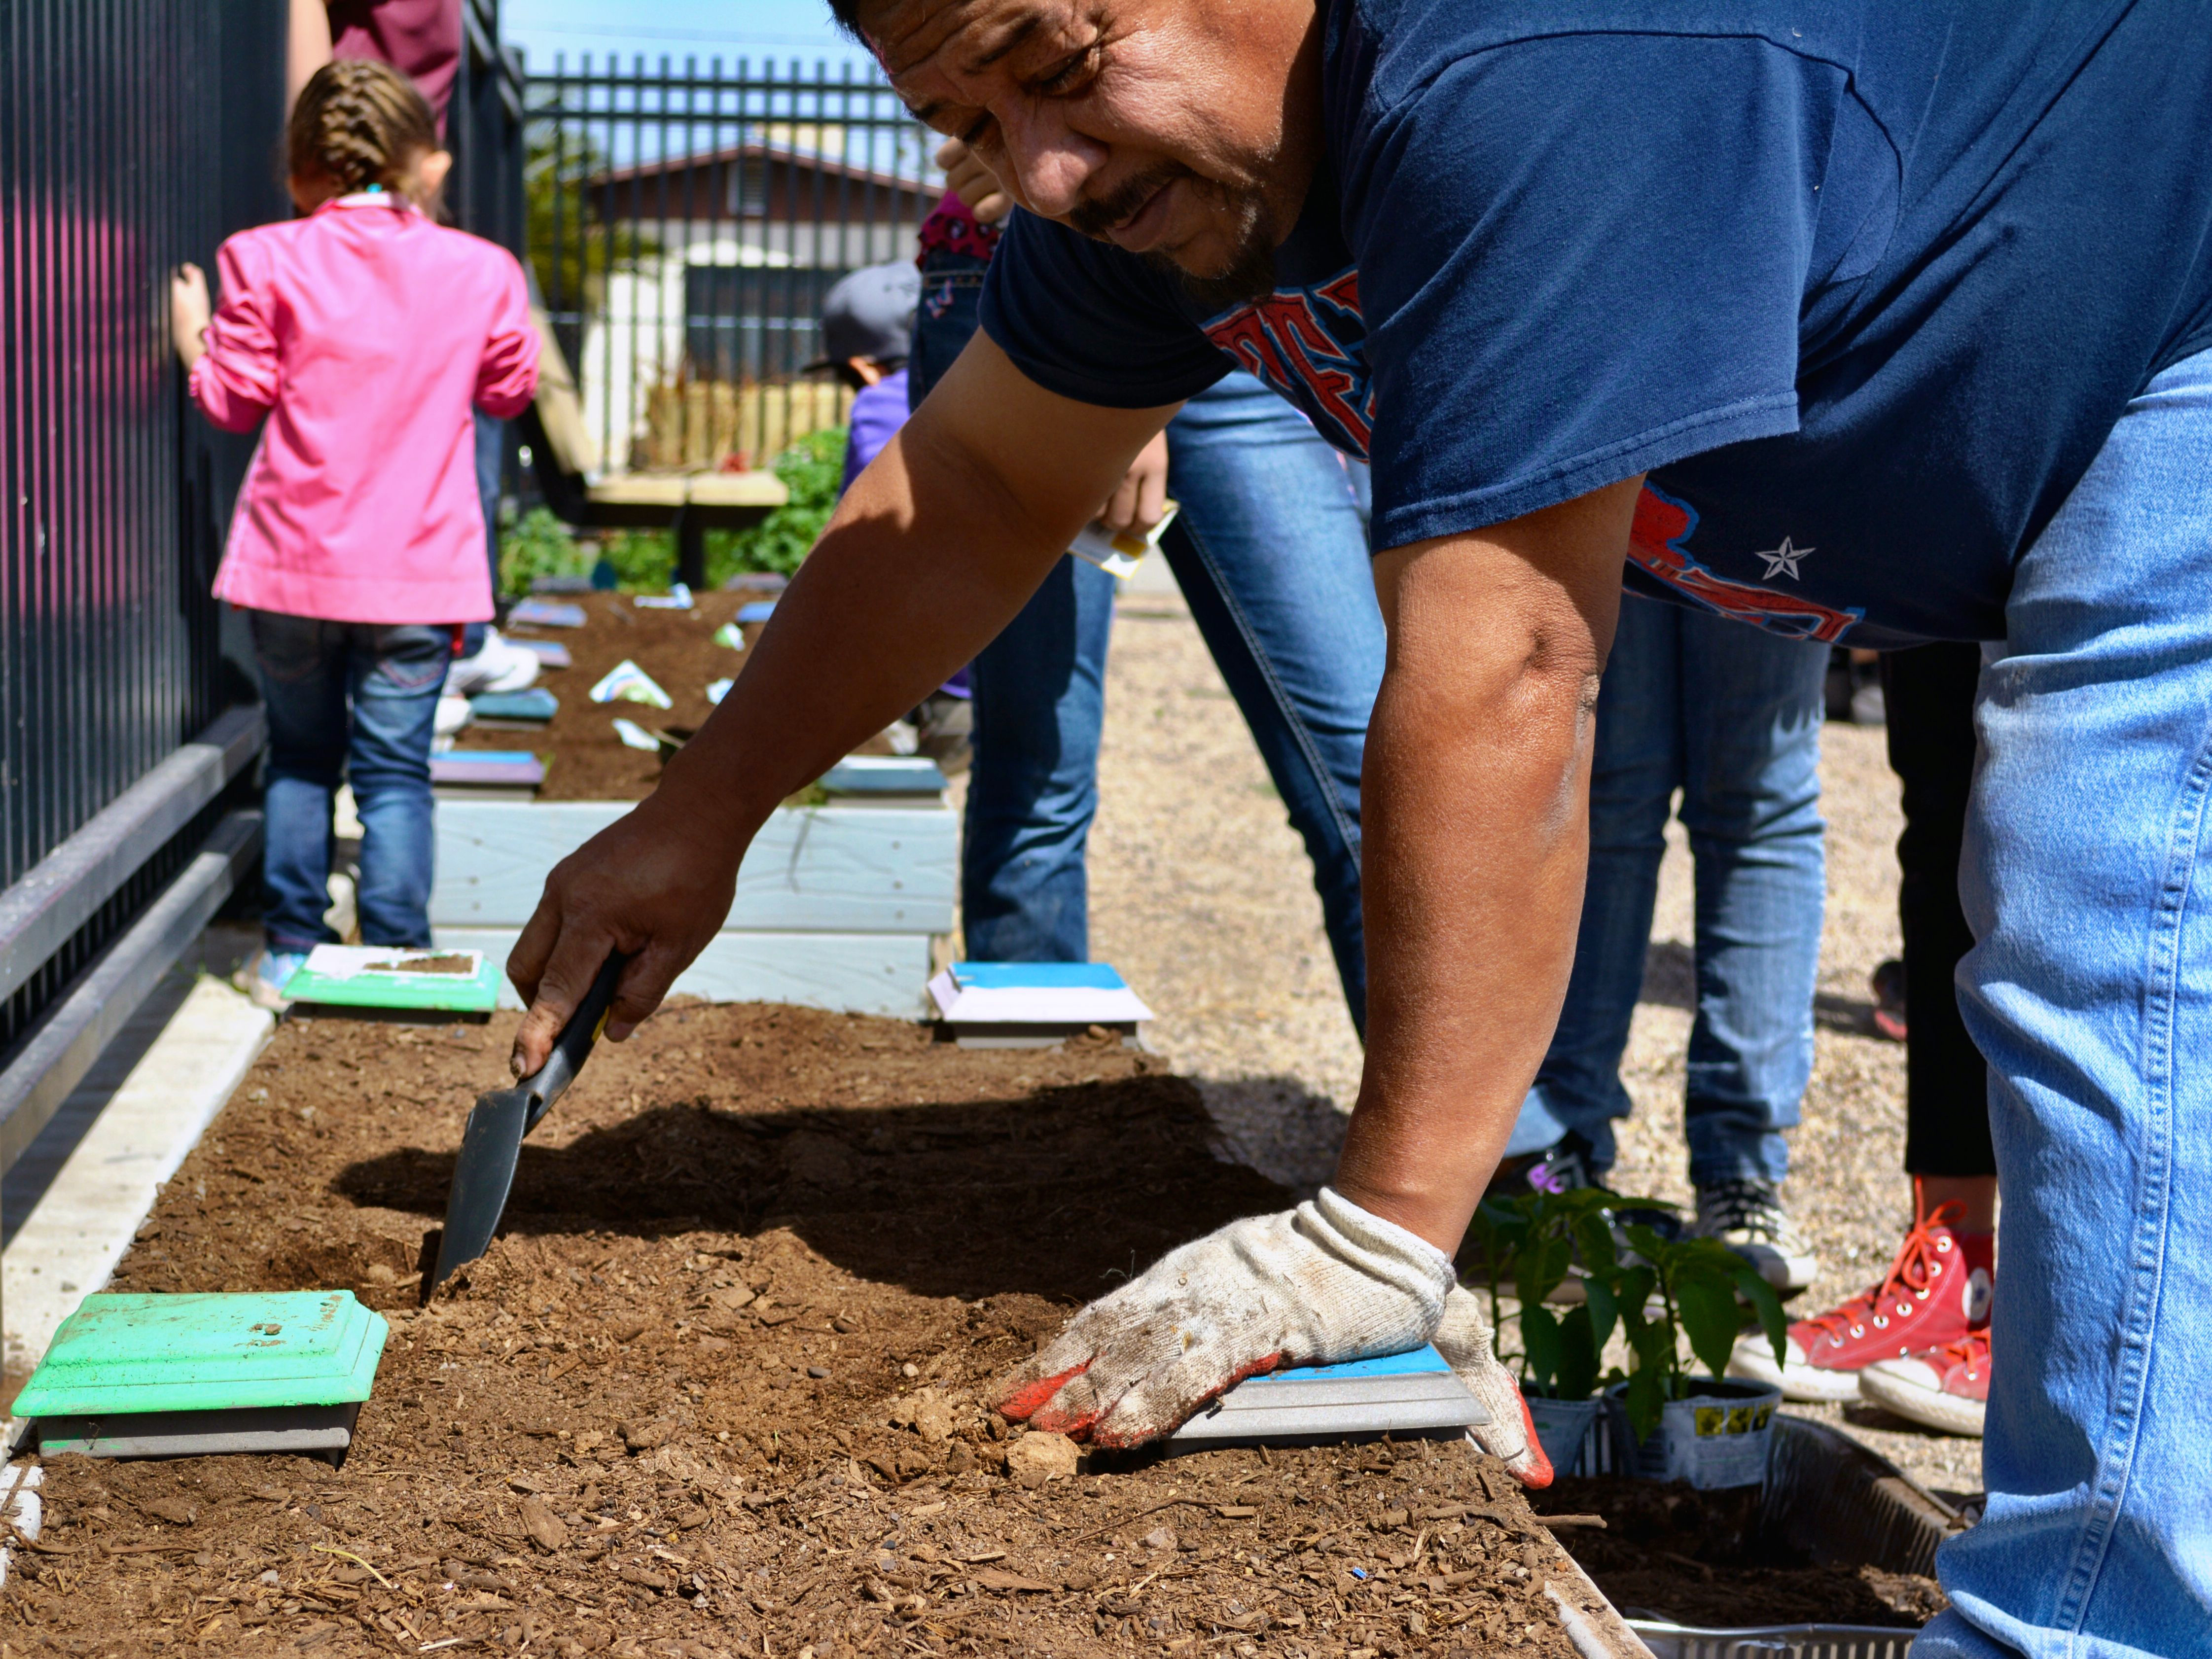 Volunteers dig in the soil to place plants. Photo Credit: City of El Paso Office of Resilience & Sustainability